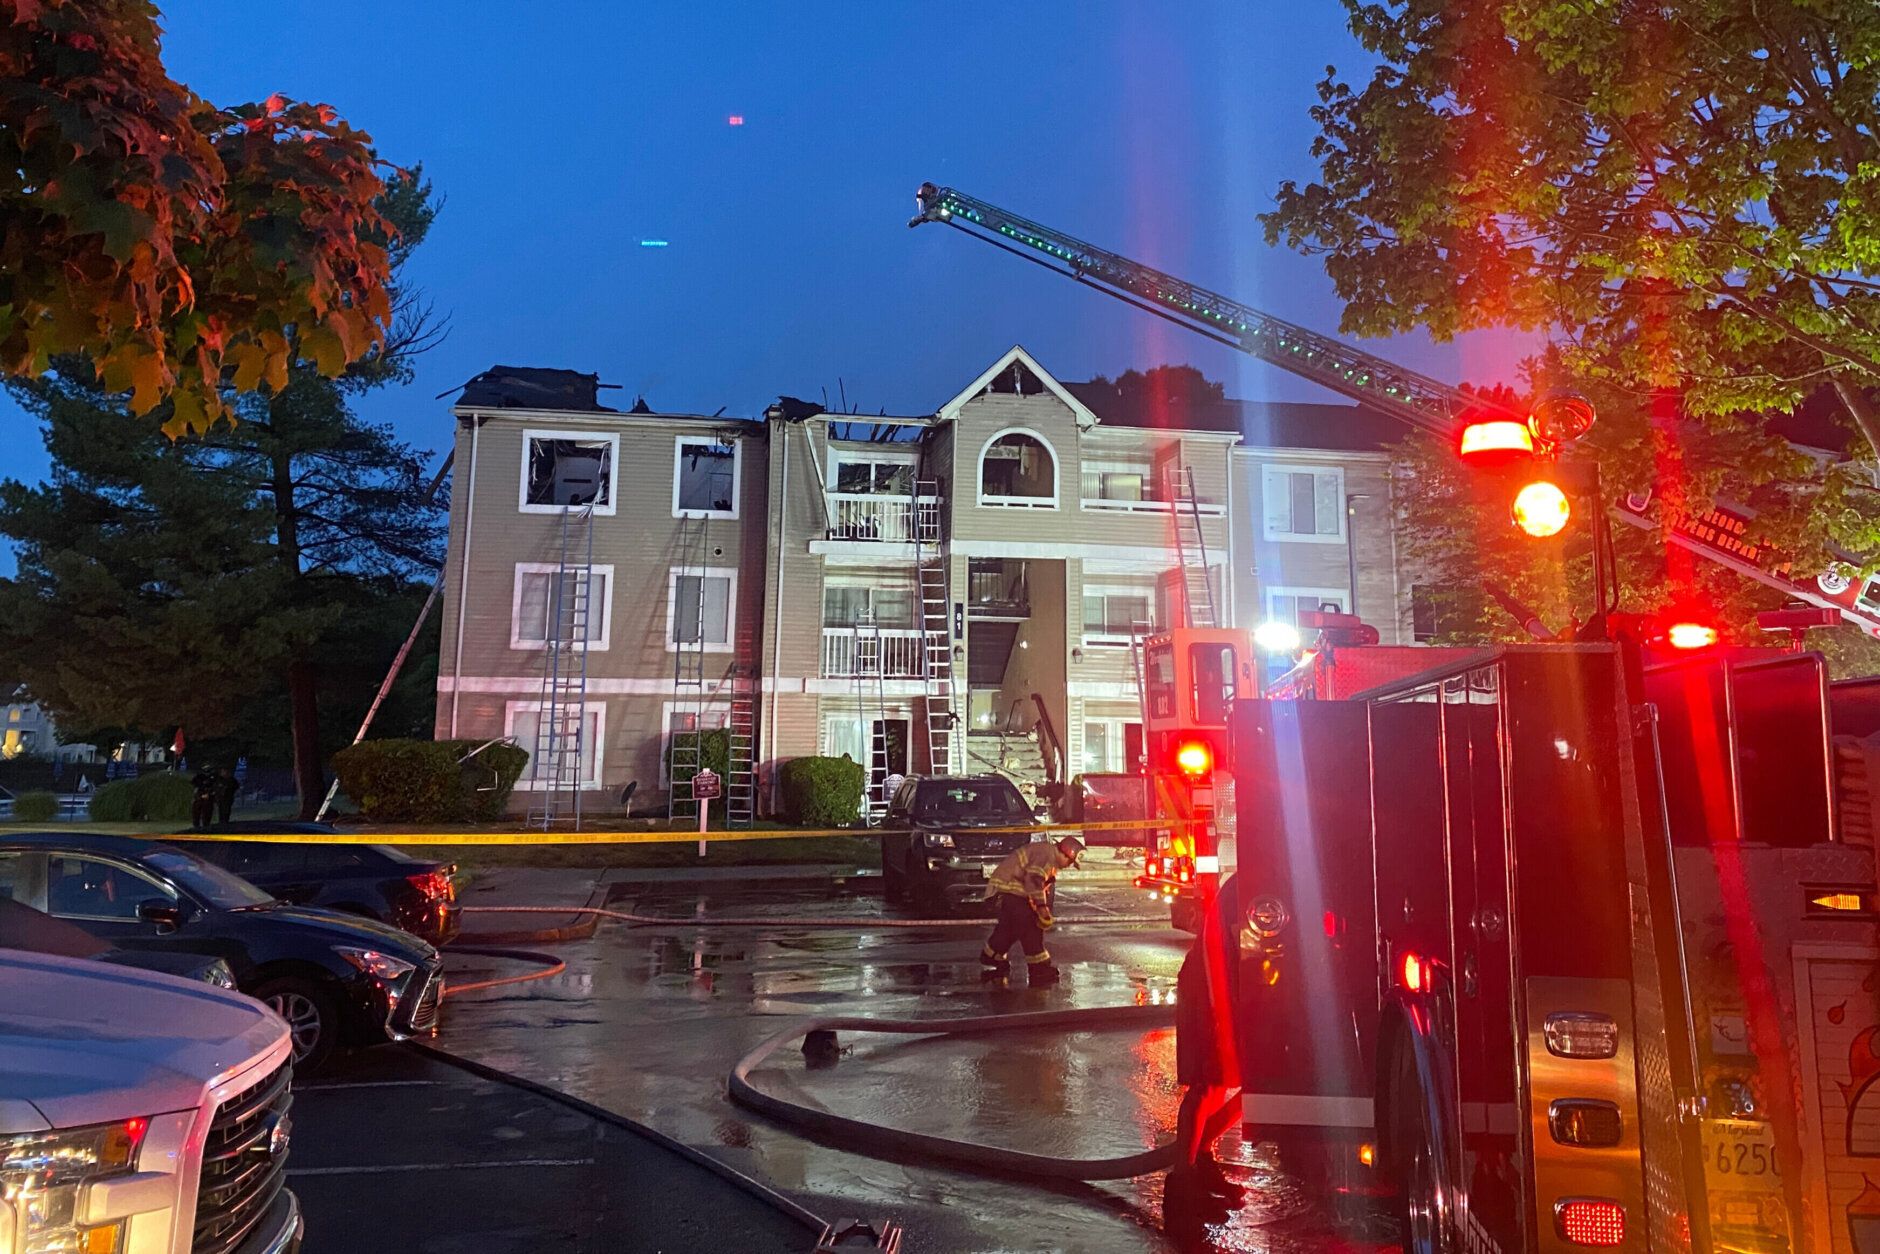 Fire engine on scene of apartment building fire